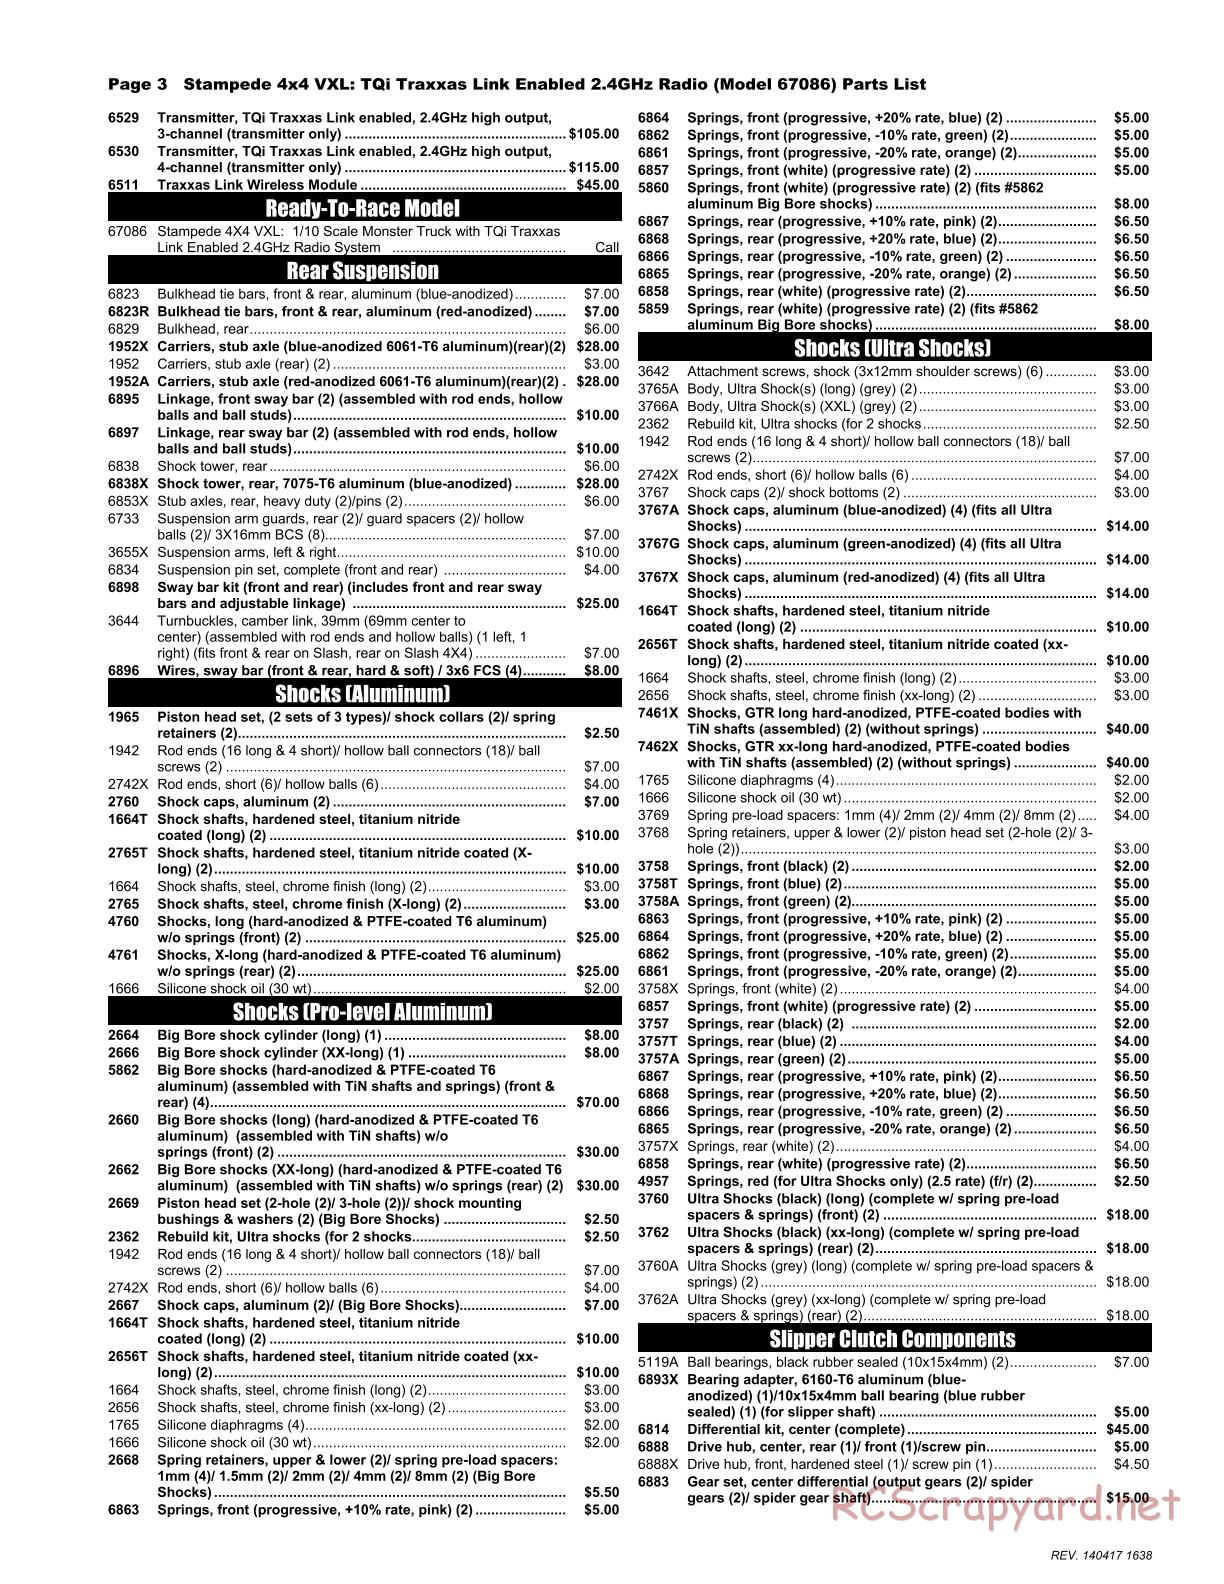 Traxxas - Stampede 4x4 VXL (2014) - Parts List - Page 3